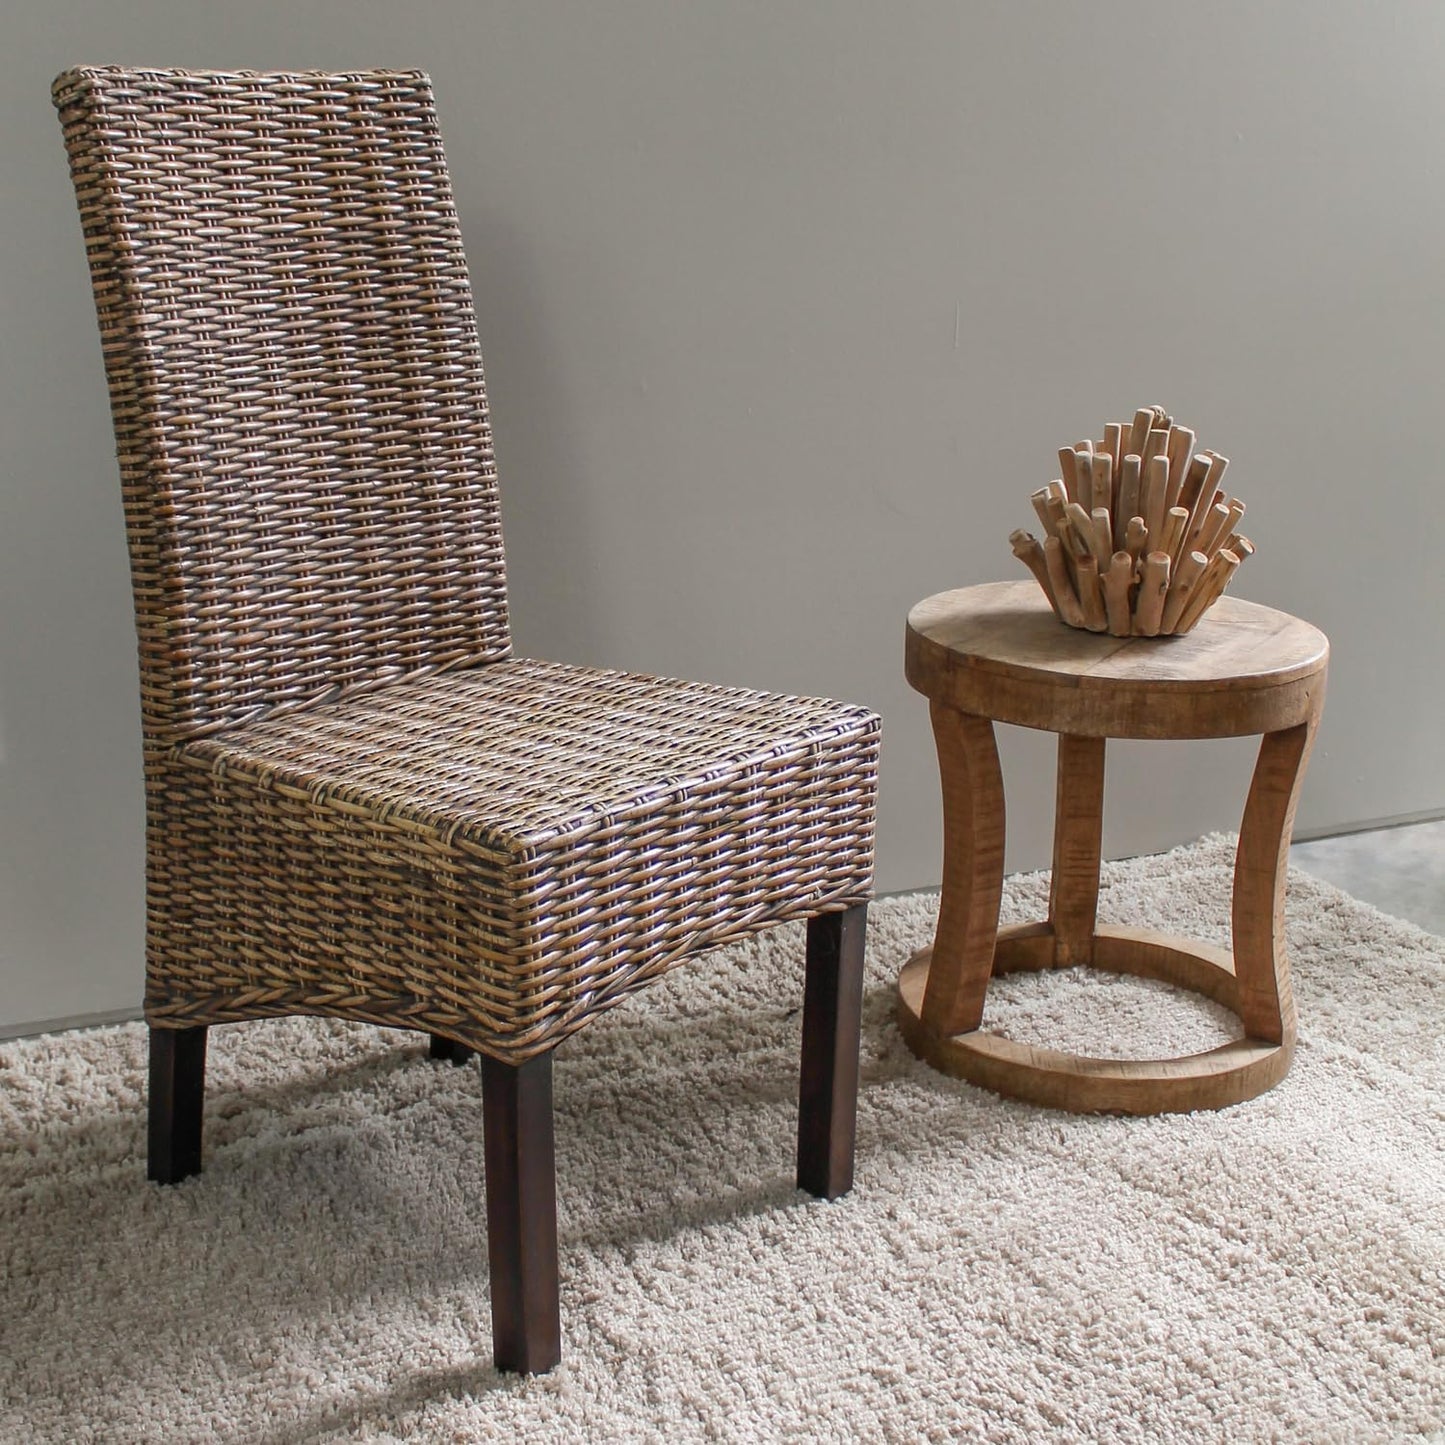 Java-Woven Rattan/Mahogany Dining Chair (set of two)